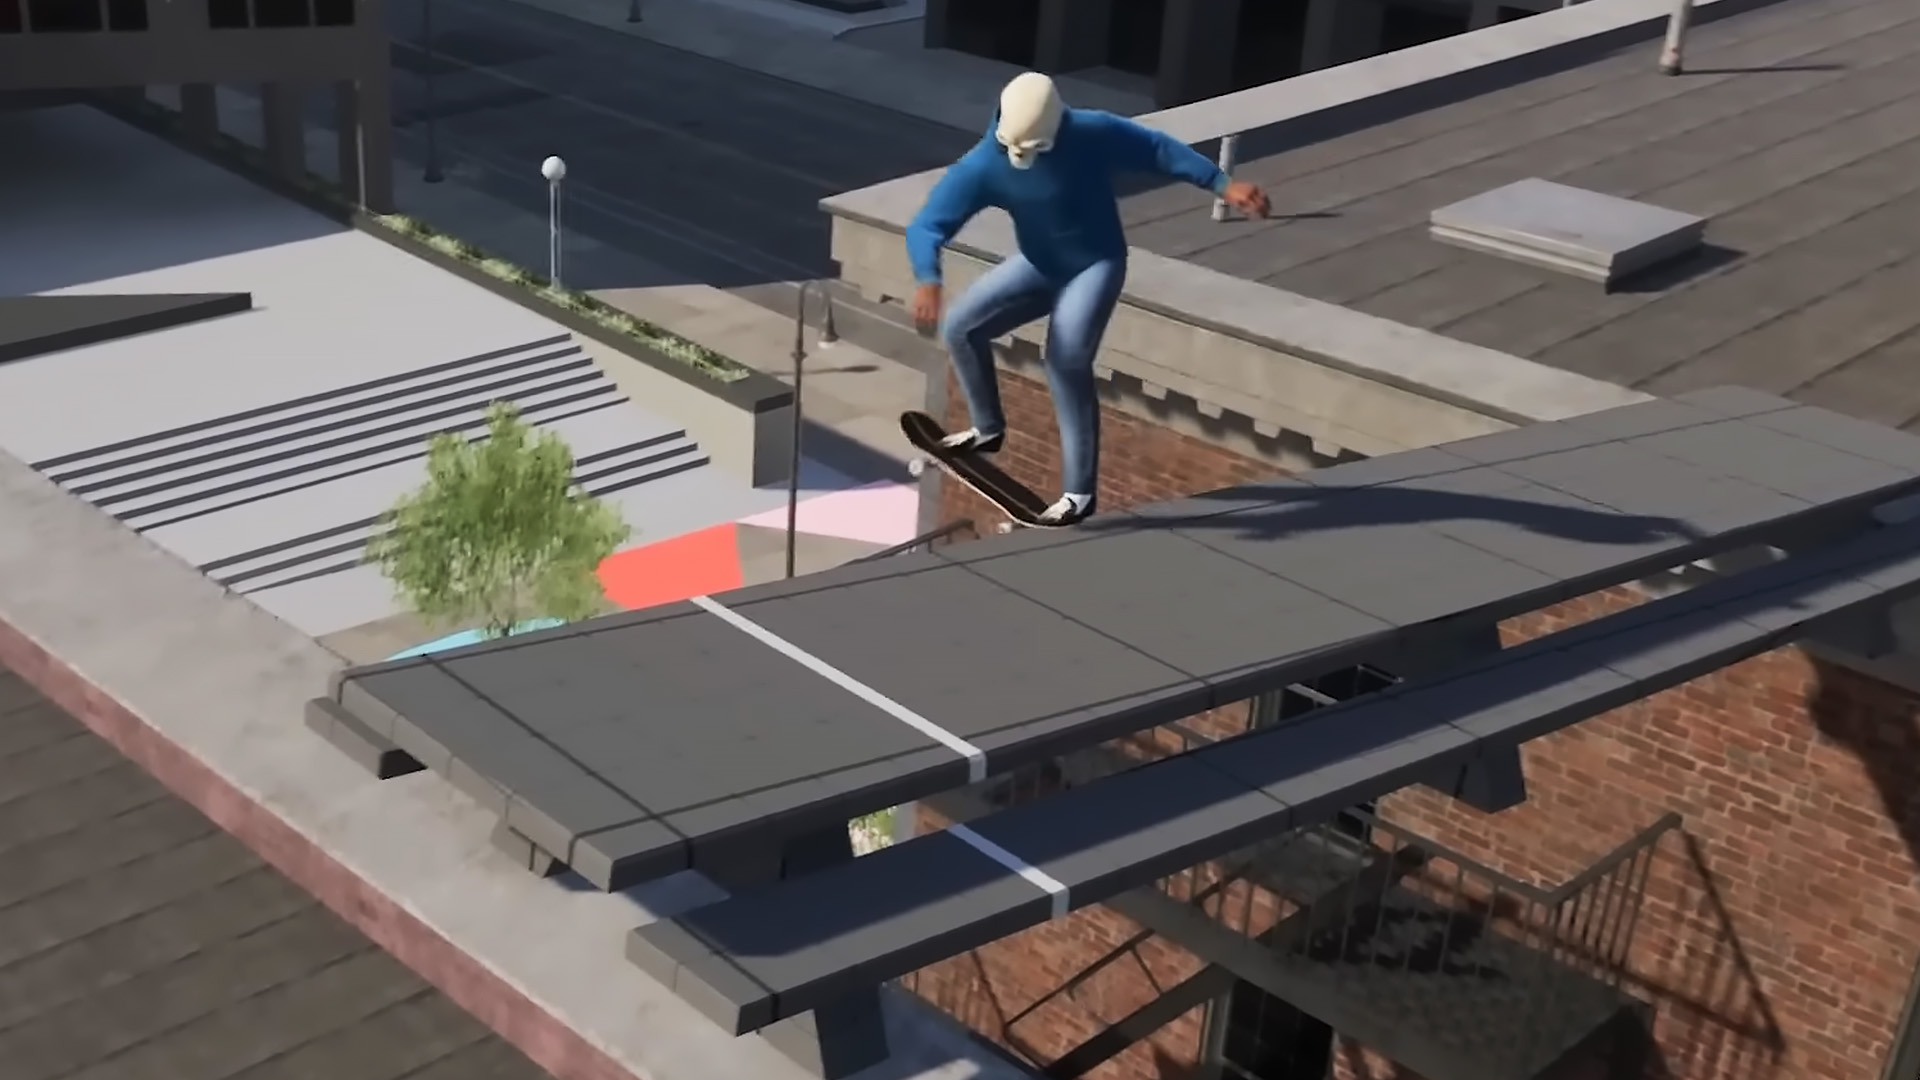 Skate 4 release date estimate, gameplay, and all the latest news